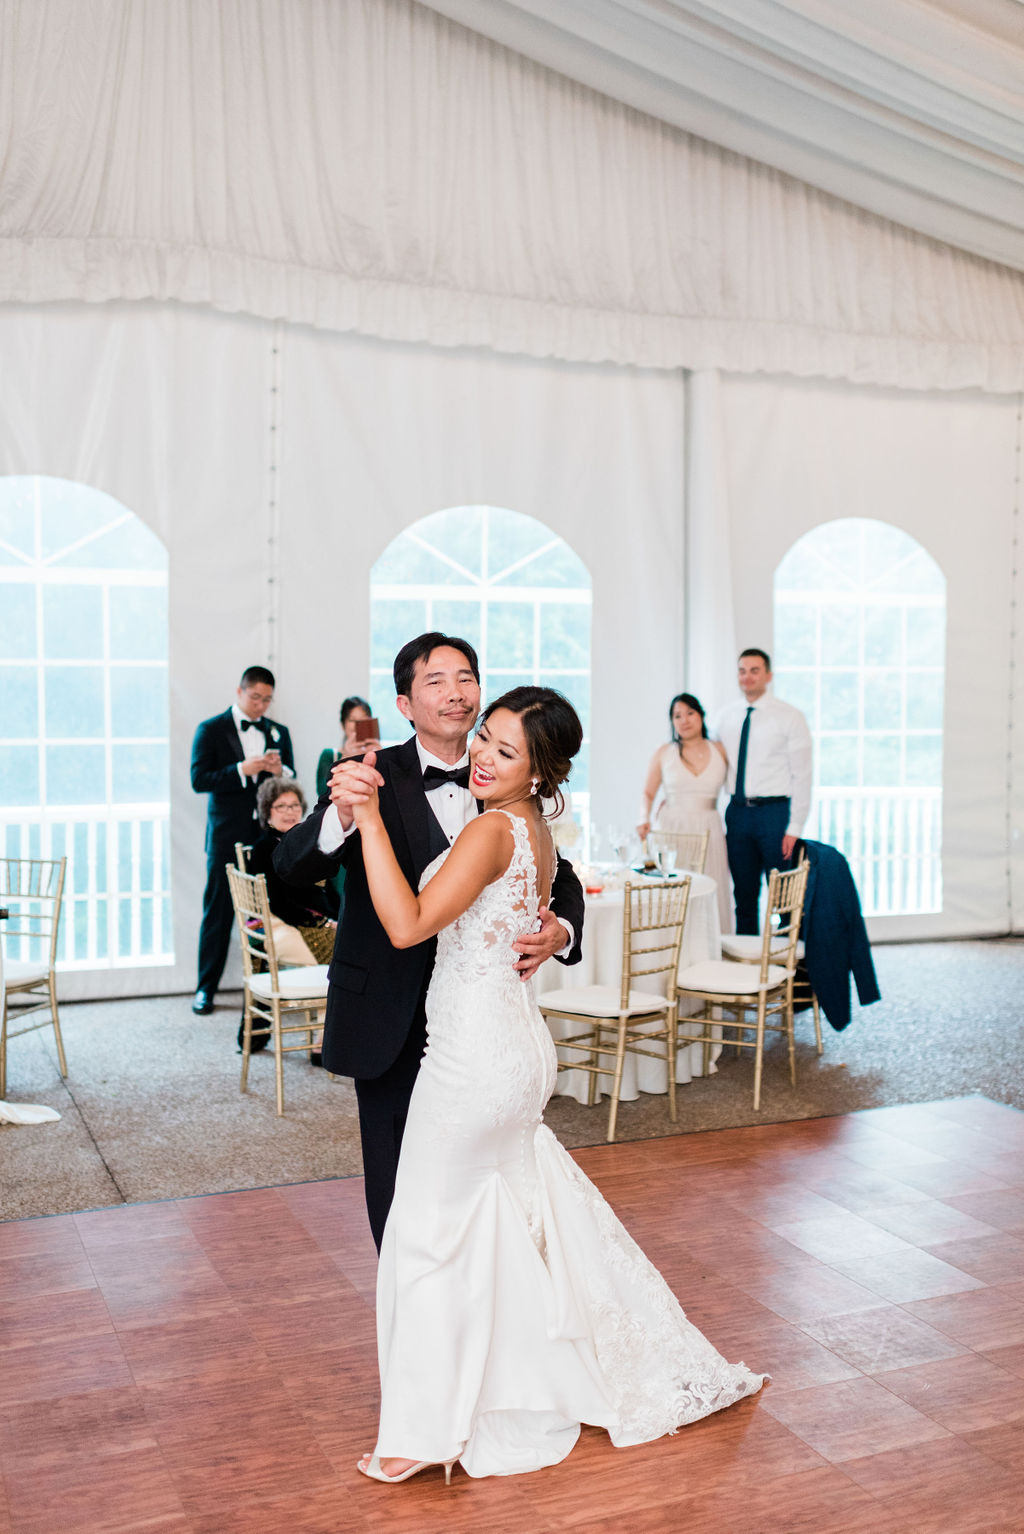 Father/daughter dance for Nashville Wedding captured by Maria Gloer Photography